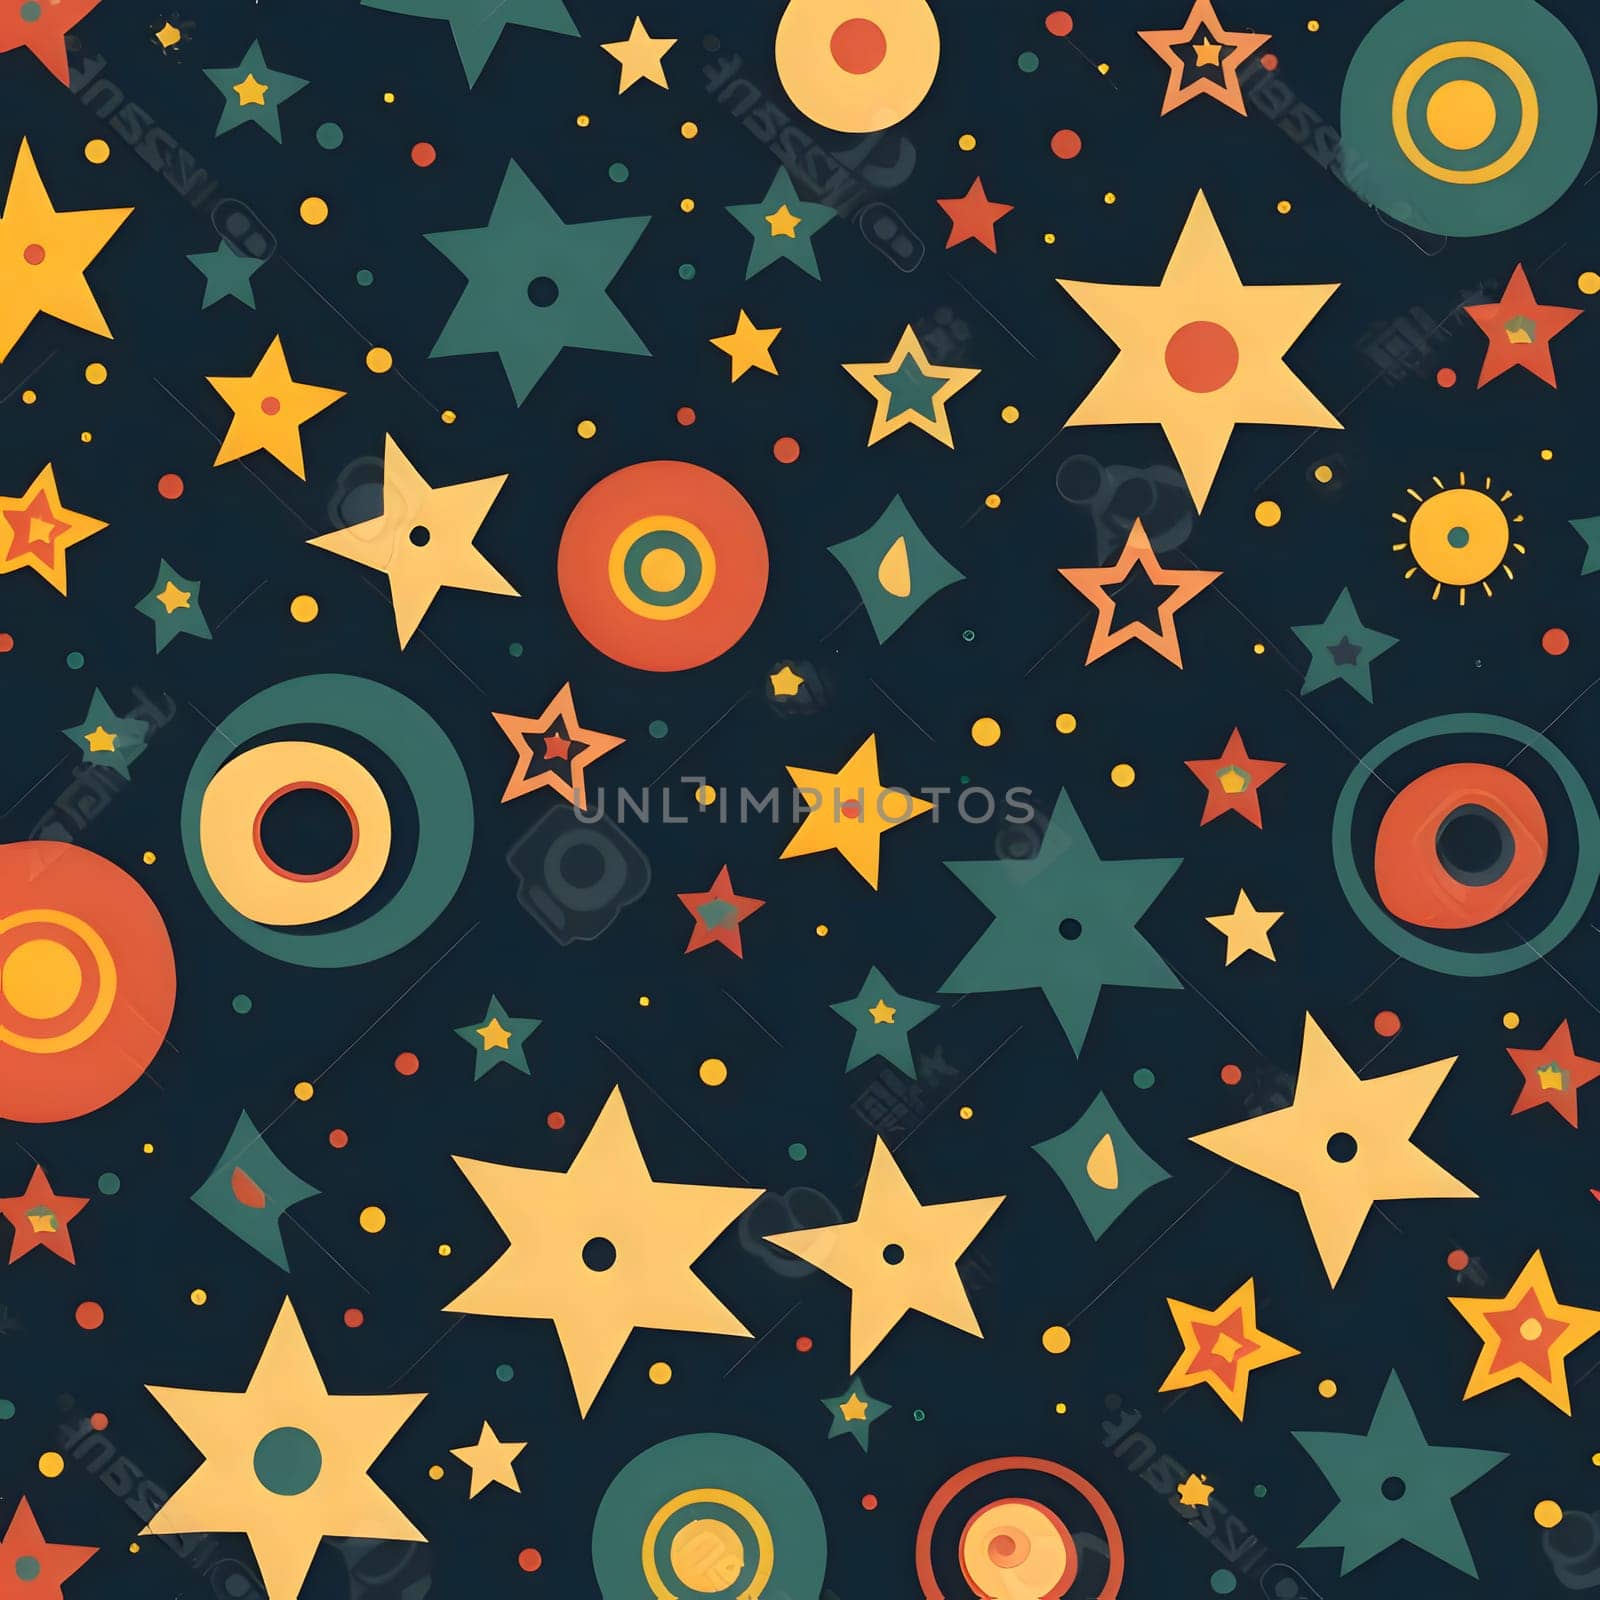 Patterns and banners backgrounds: Seamless pattern with stars and circles in retro style. Vector illustration.